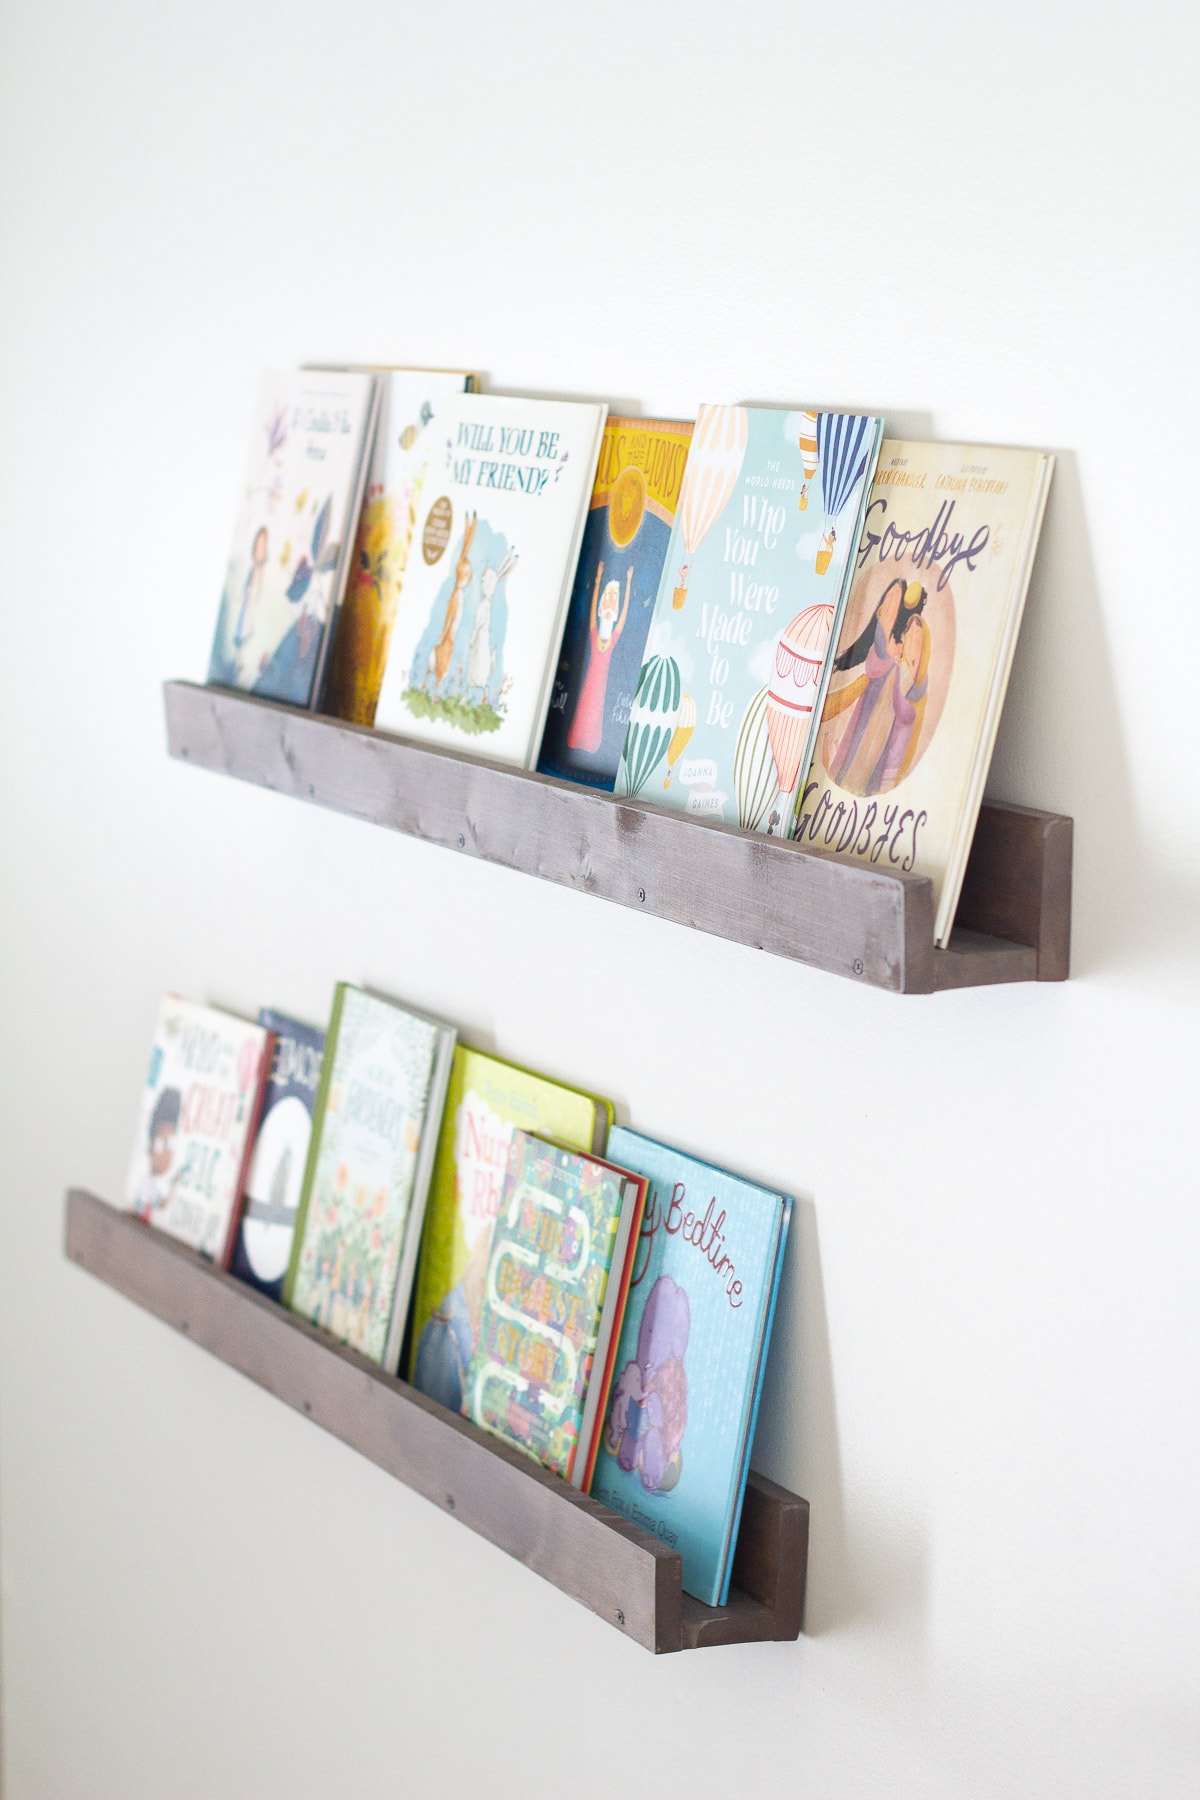 Kids' books displayed on wooden floating wall shelves.